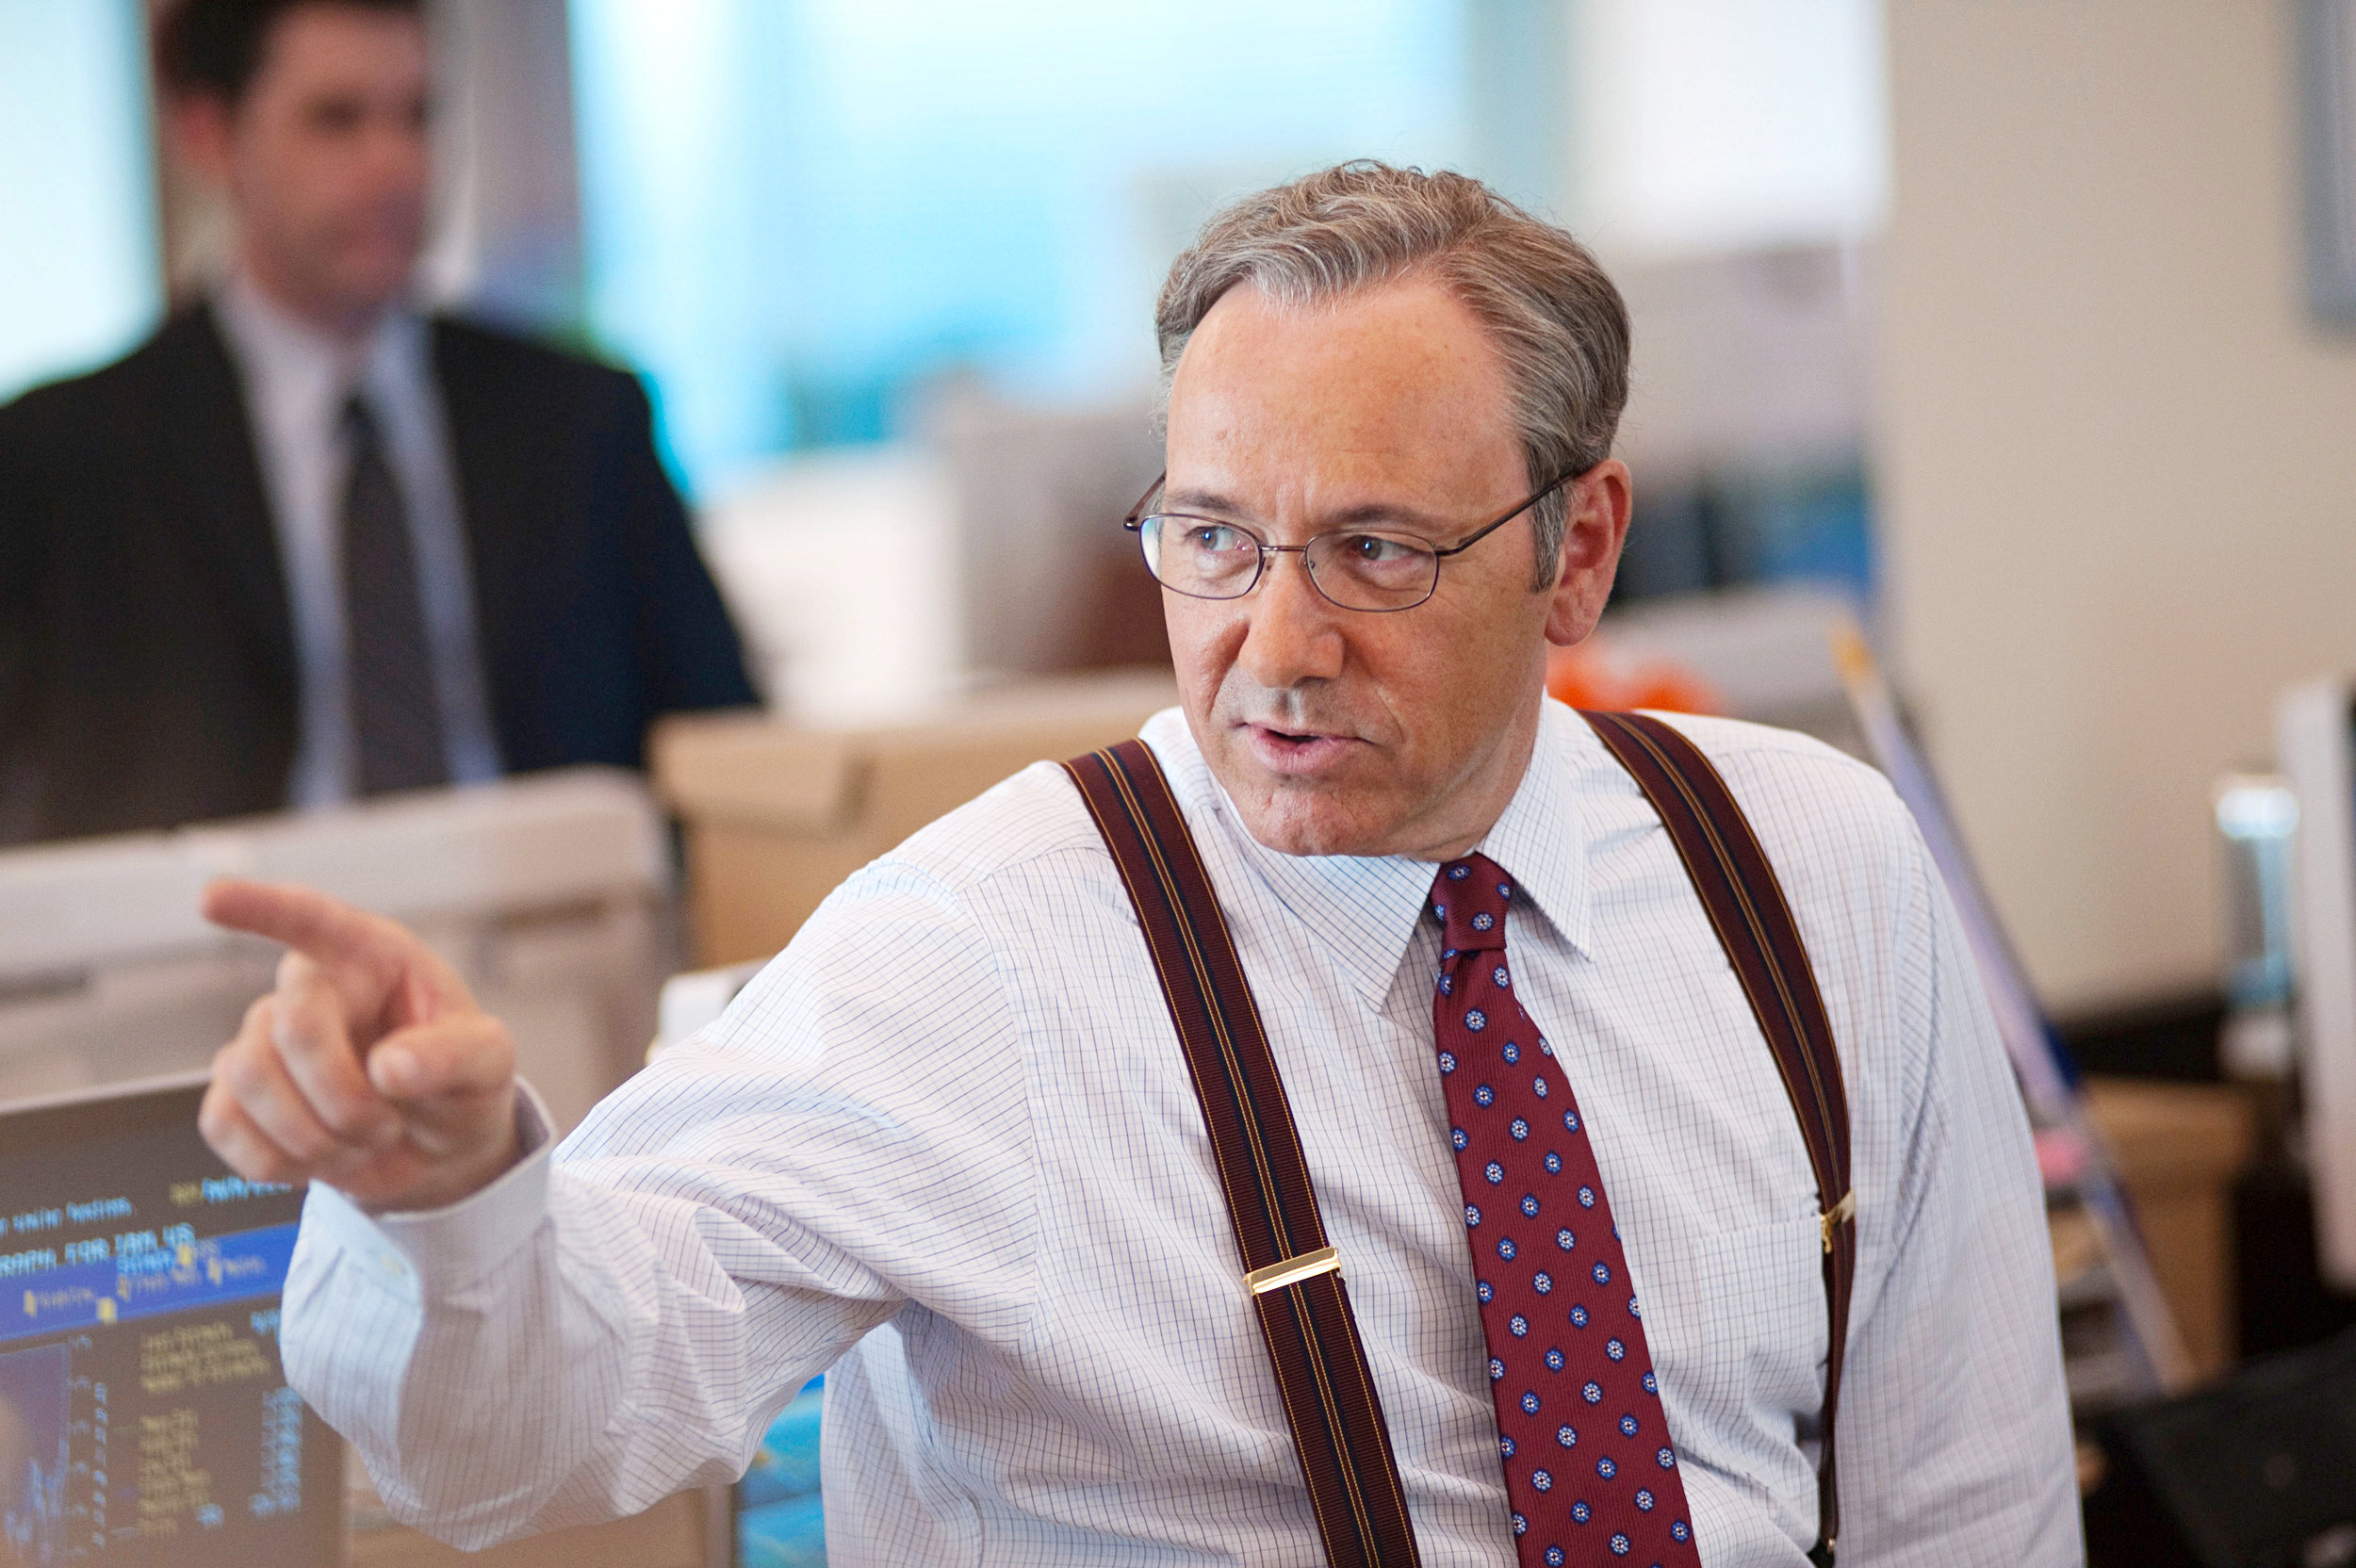 Kevin Spacey stars as Sam Rogers in Roadside Attractions' Margin Call (2011)